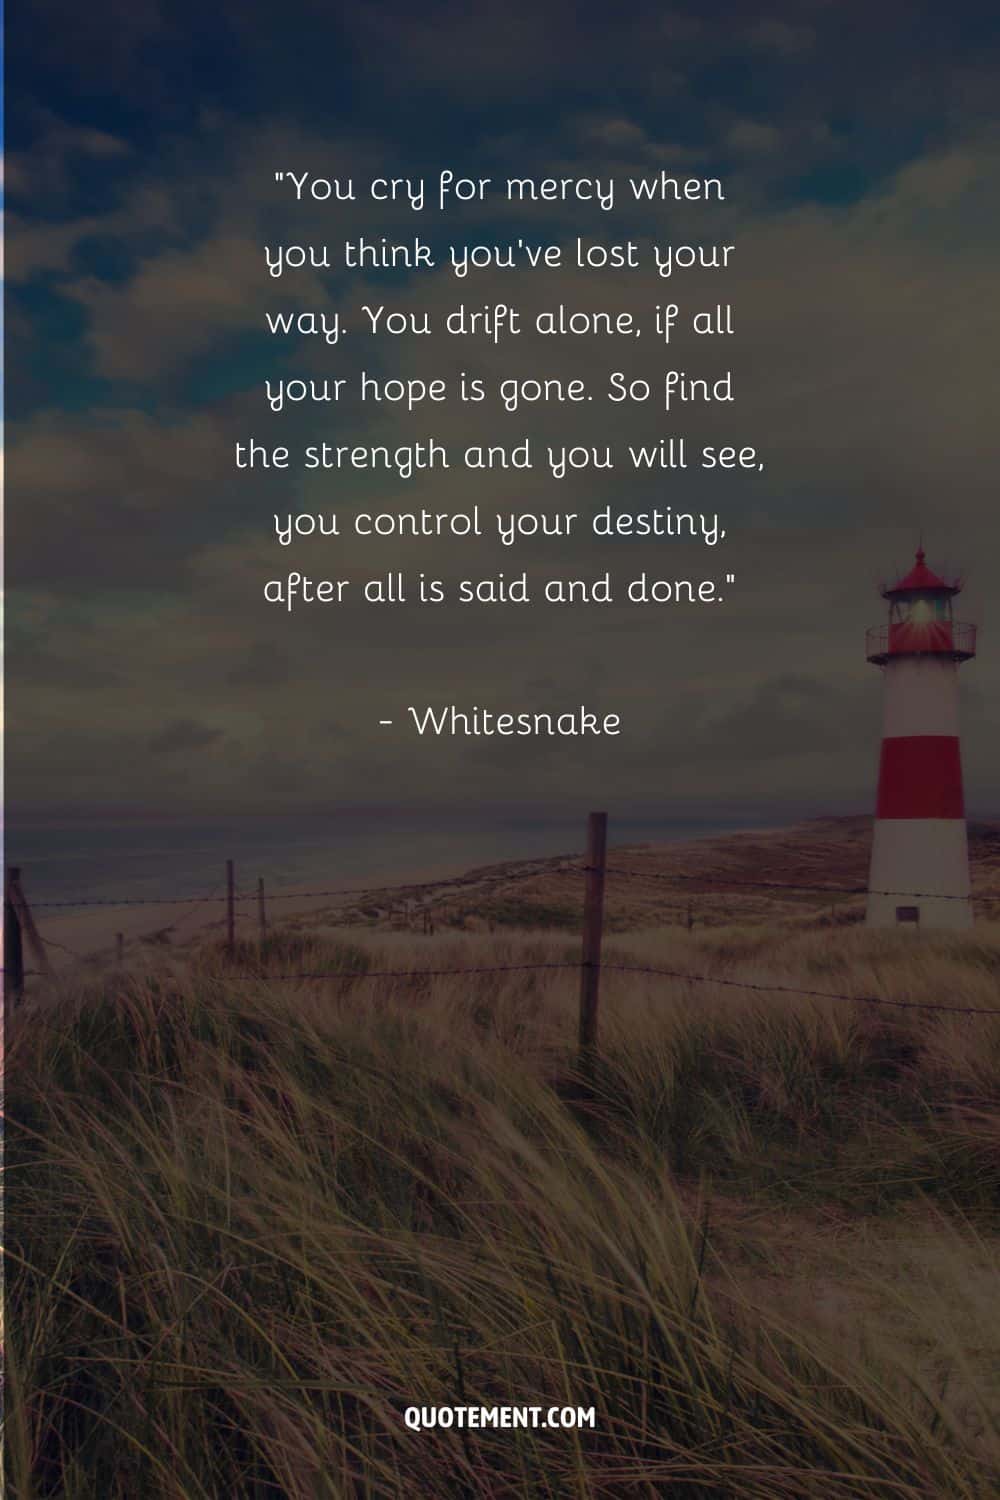 Motivational quote by Whitesnake and a lighthouse in the background